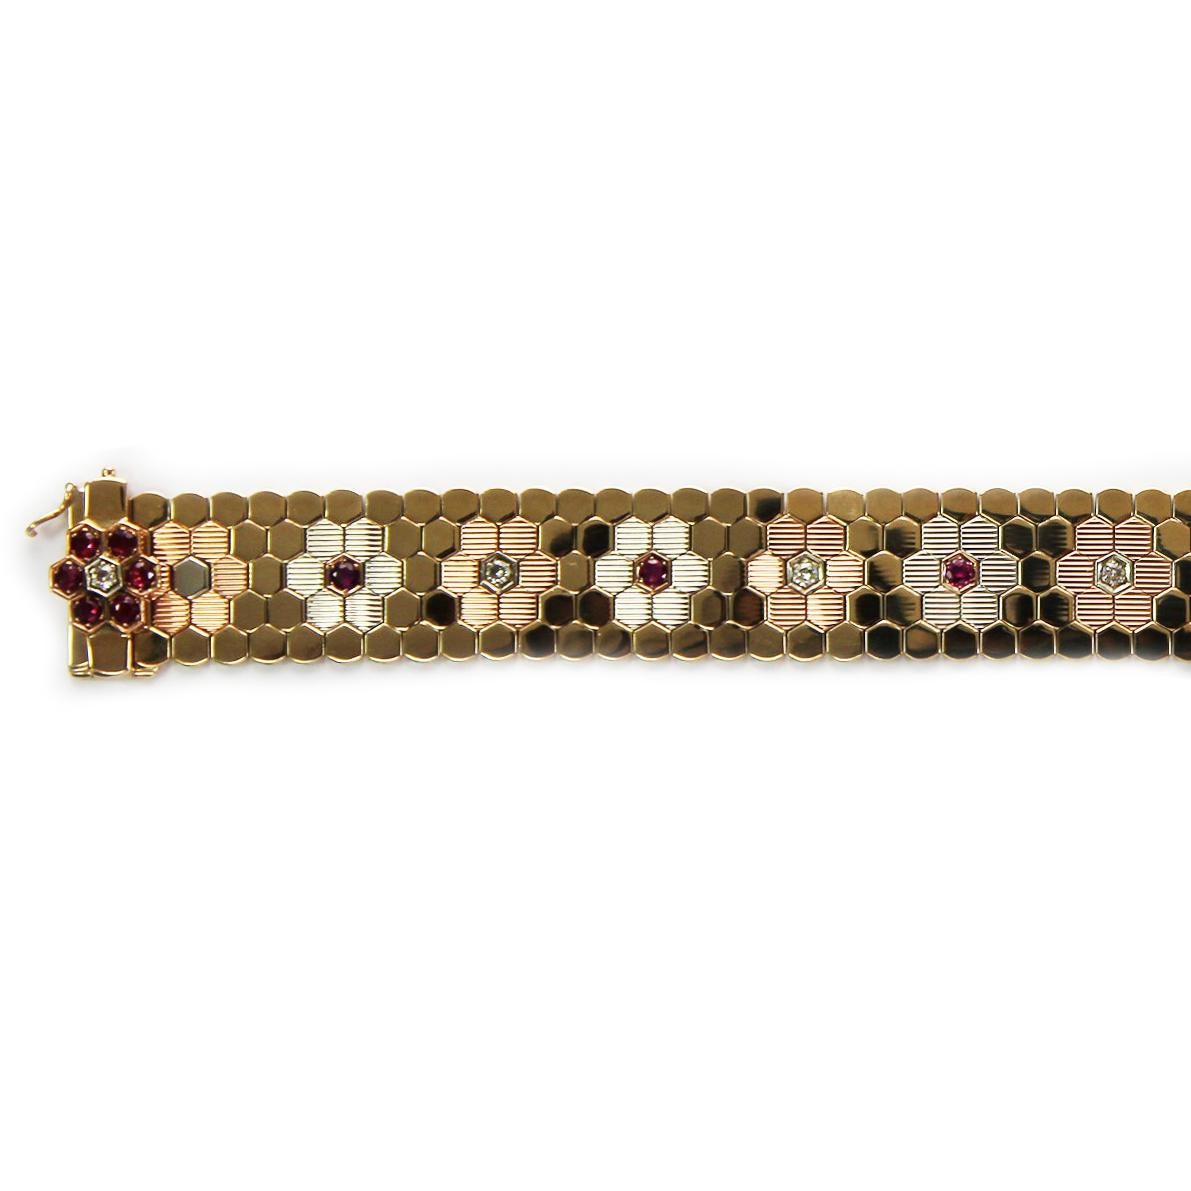 A ruby and diamond honeycomb-style flexible bracelet. The interlocking 9 carat yellow, white and rose gold pieces are arranged into a band patterned with flowers, each with central ruby and diamond points. The bracelet has a double locking safety